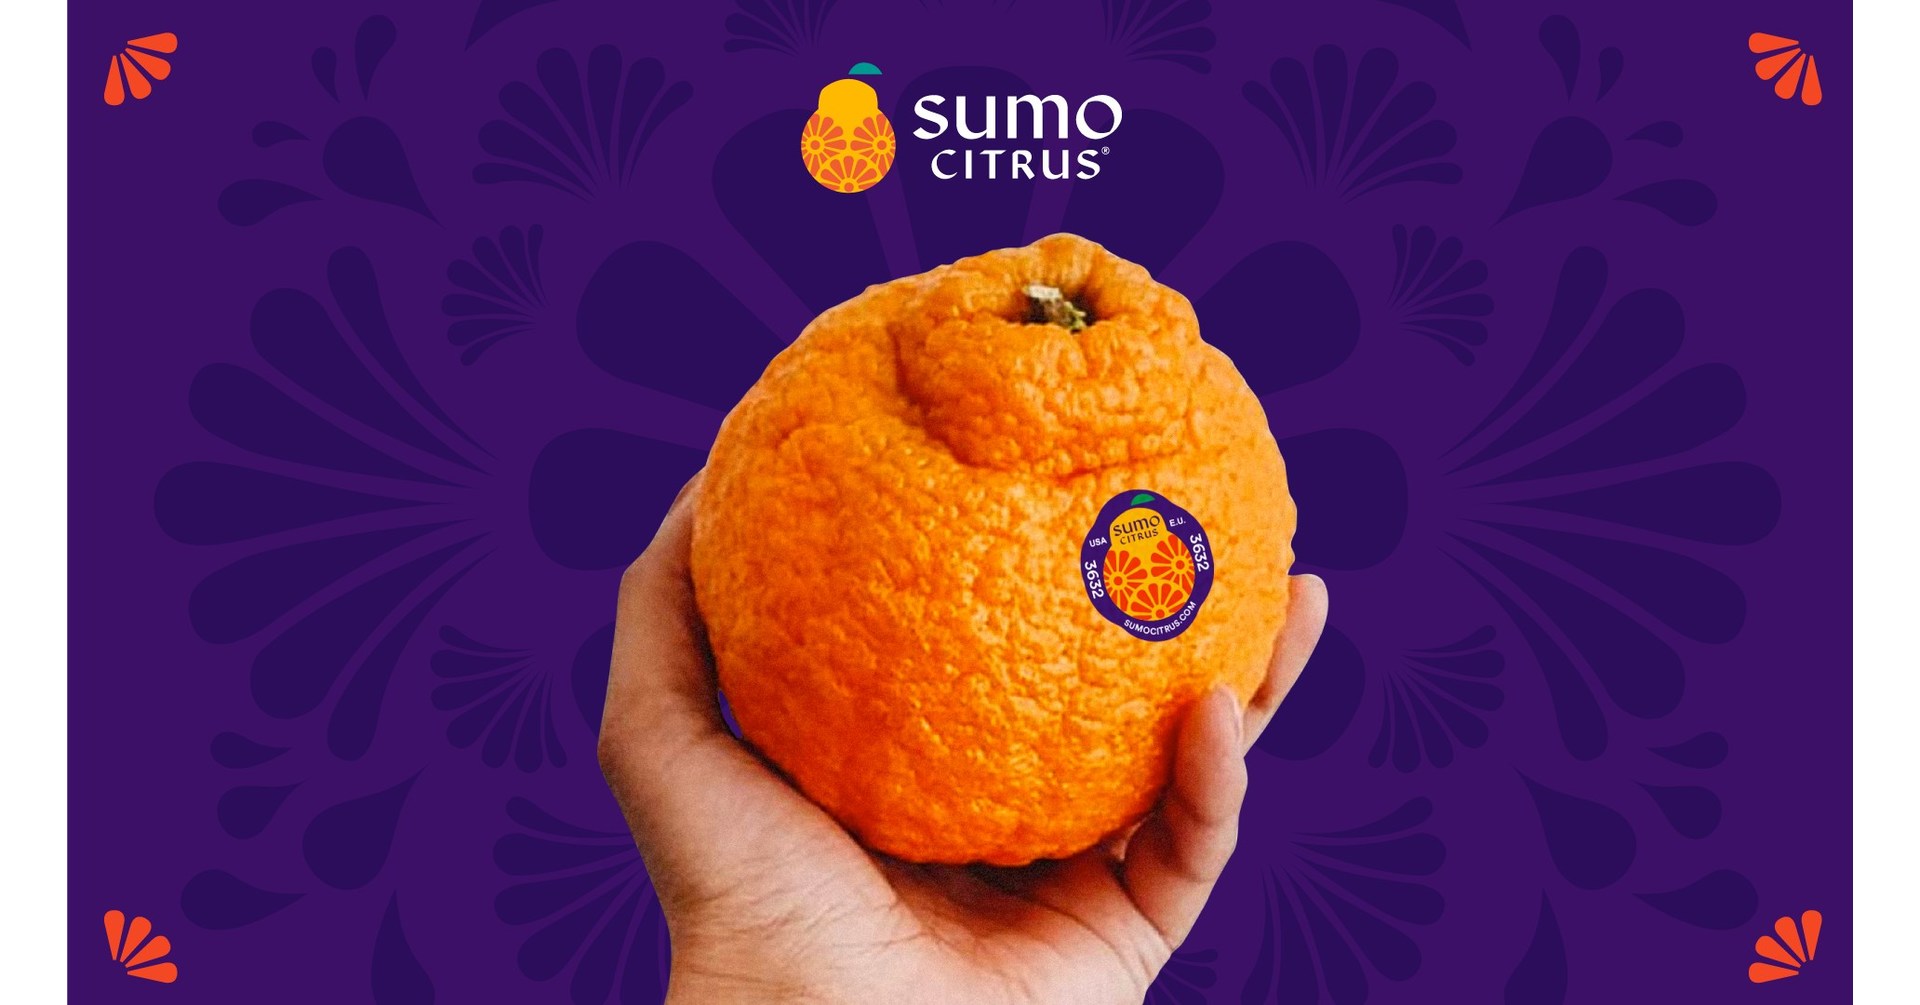 The Hype Is Real - Sumo Citrus®, The World's Most Loved Fruit